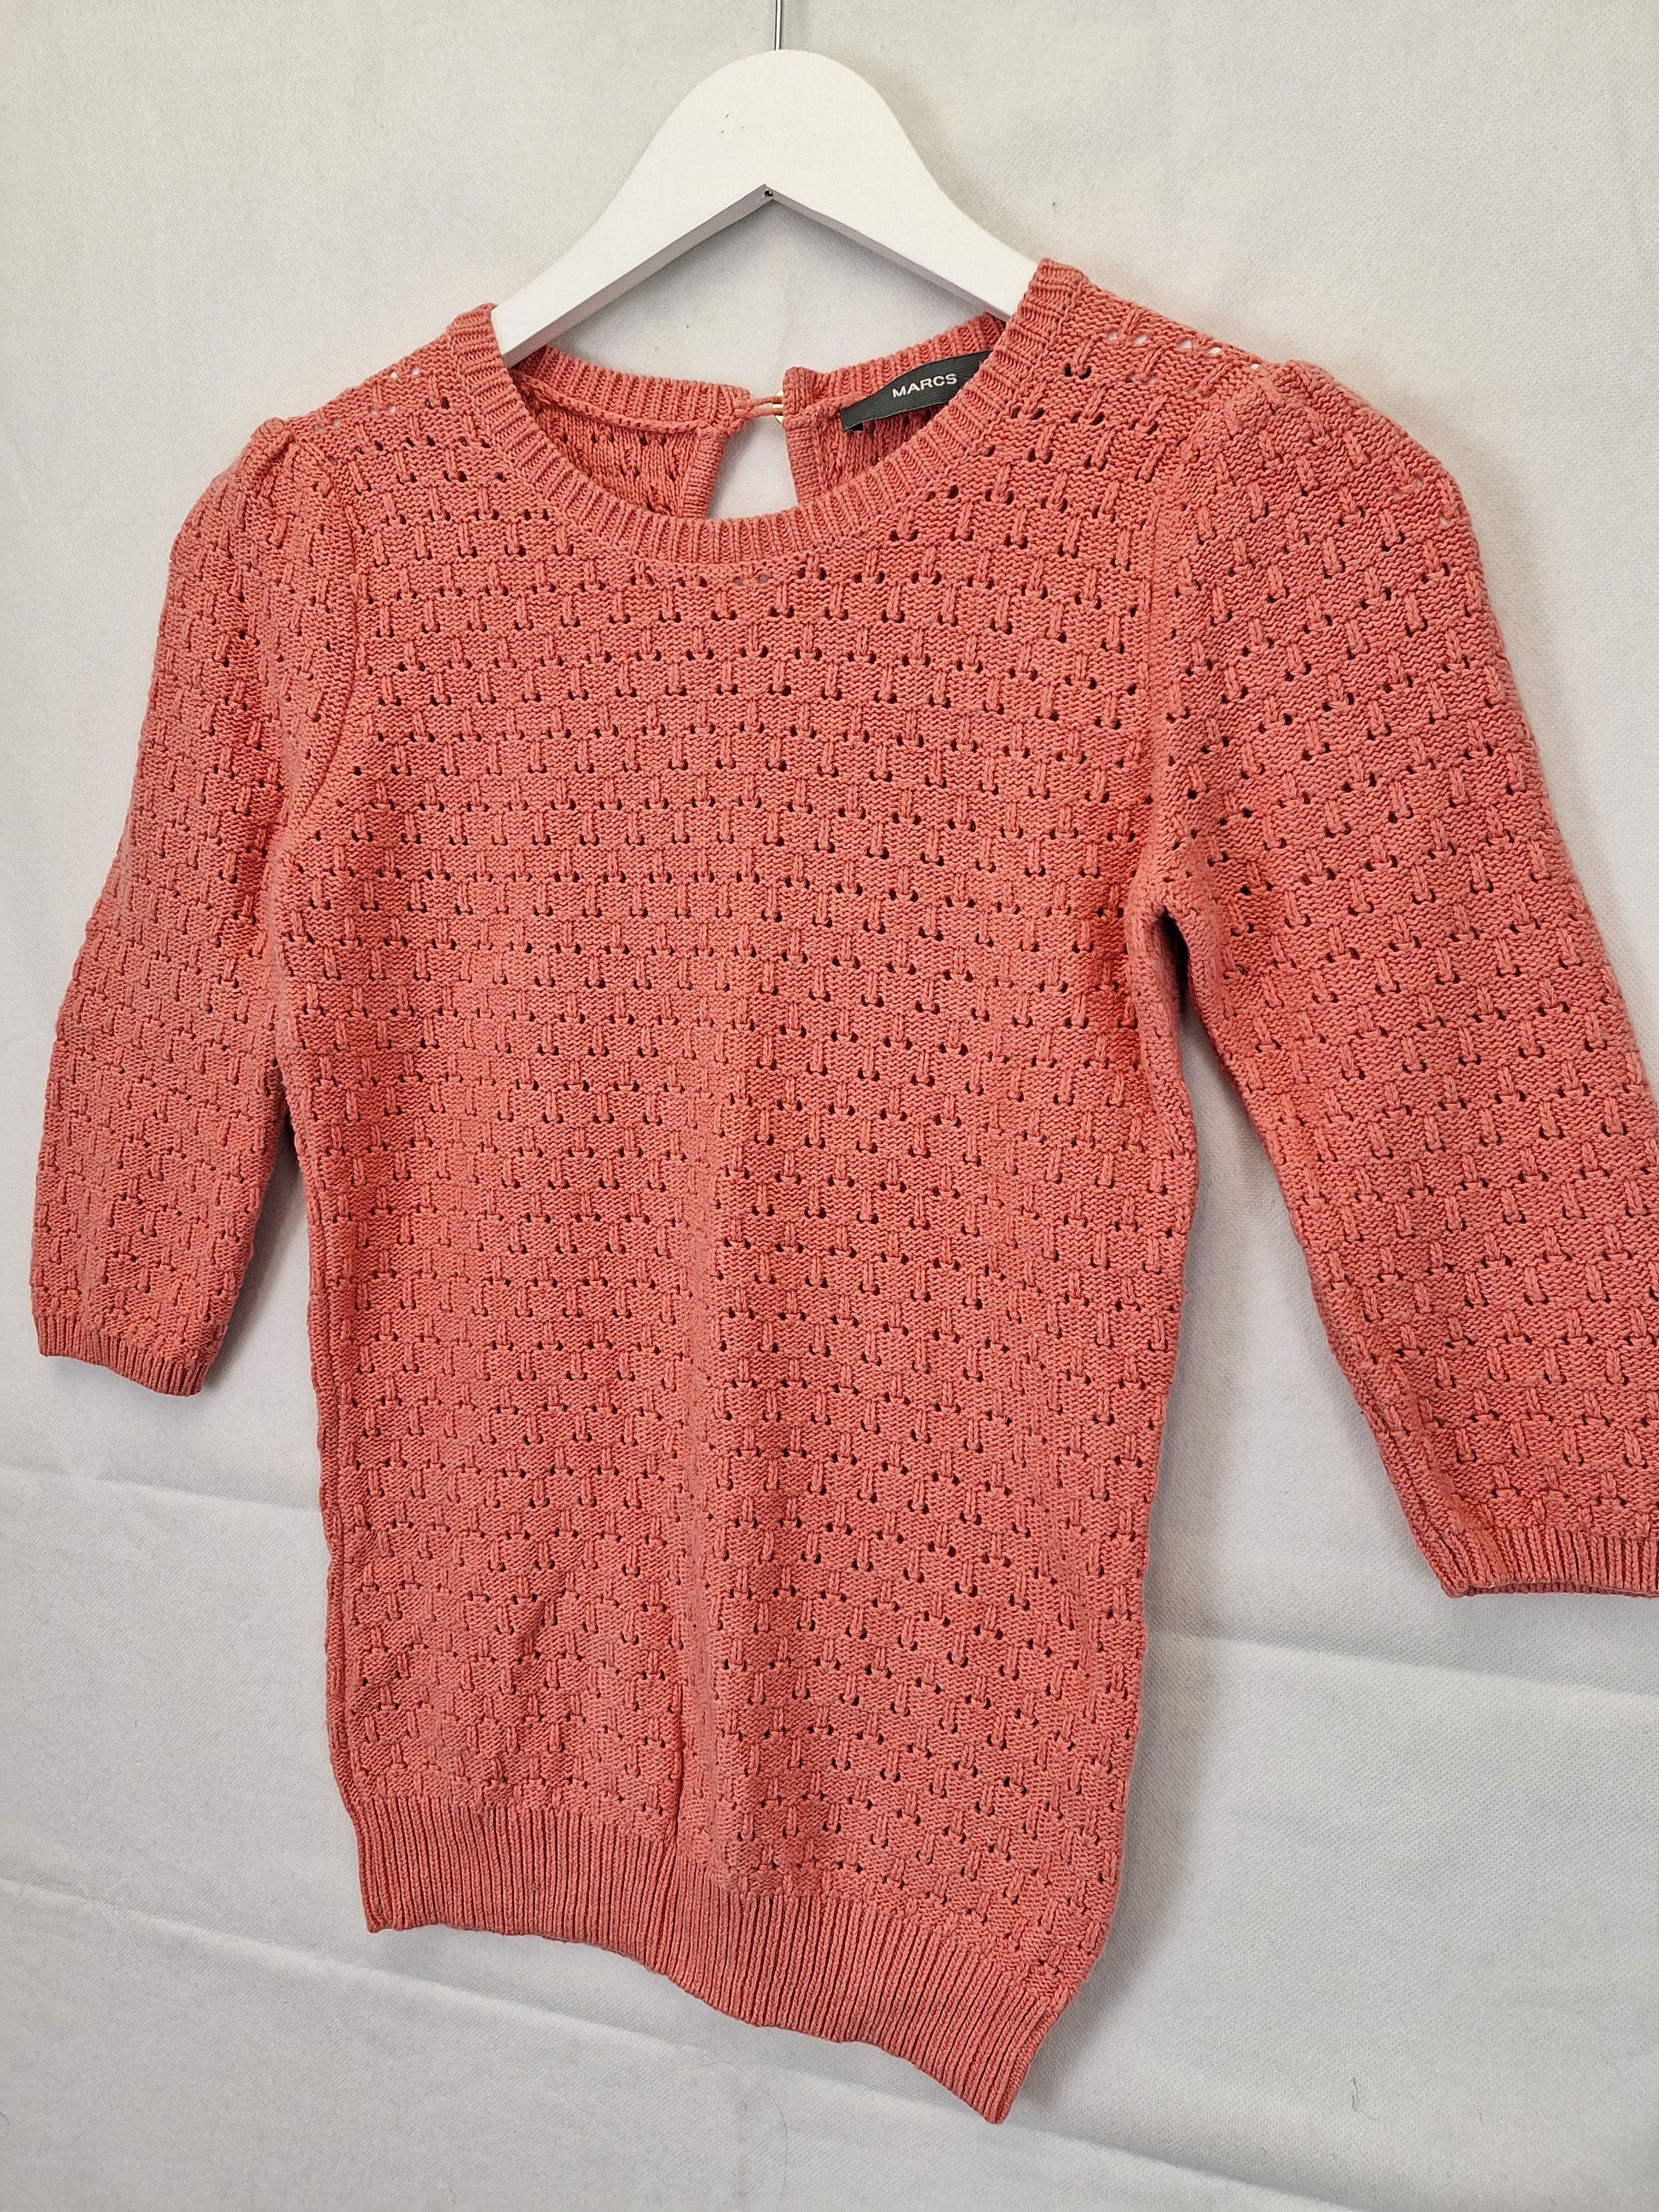 Marcs PCasual Everday Crochet Jumper Size XS by SwapUp-Online Second Hand Store-Online Thrift Store